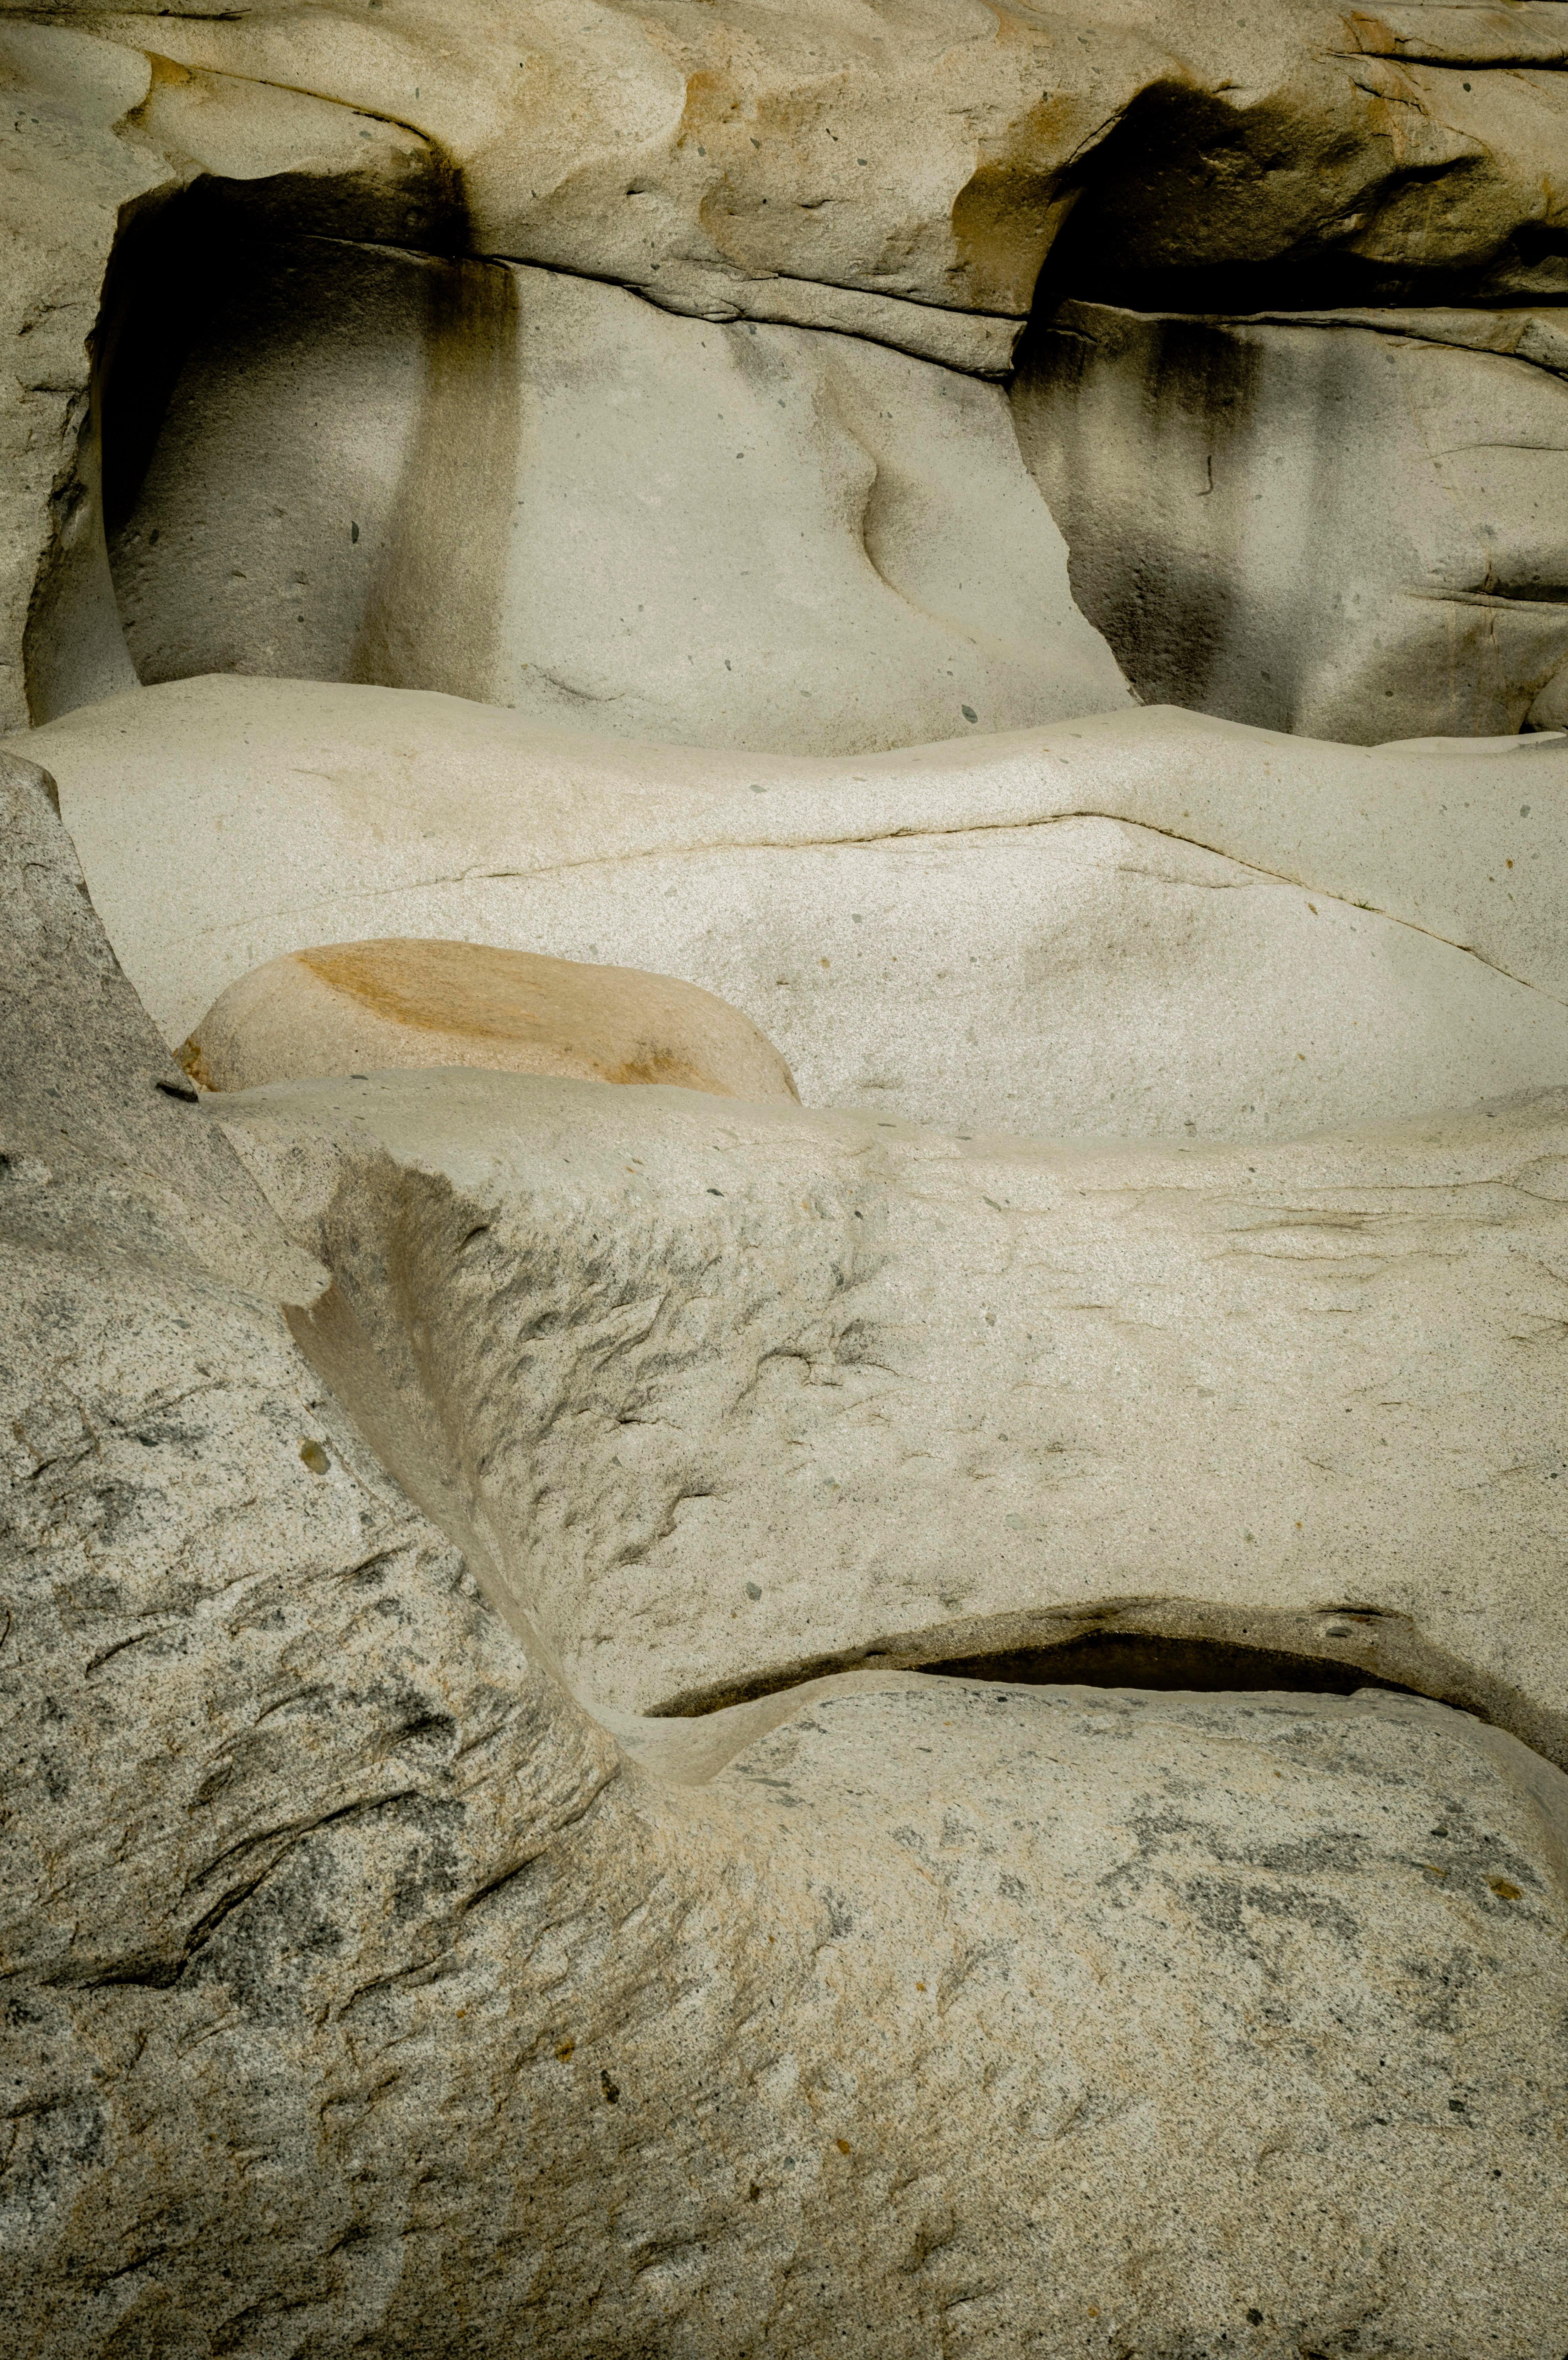 Untitled III and Untitled I. Abstract rocks landscape color photographs - Photograph by Mauricio Velez